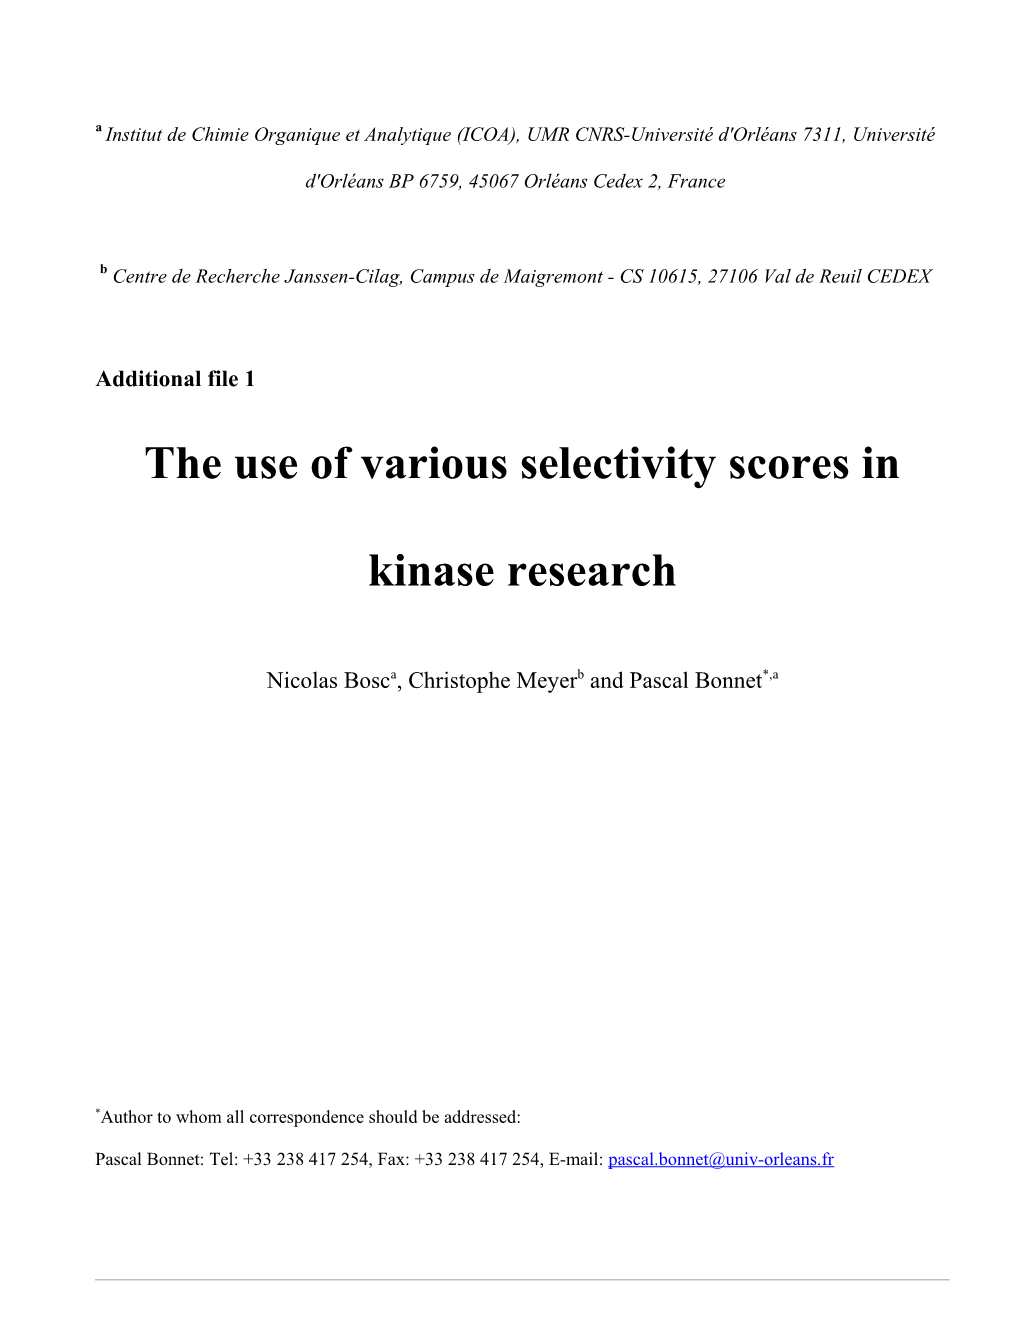 The Use of Various Selectivity Scores in Kinase Research